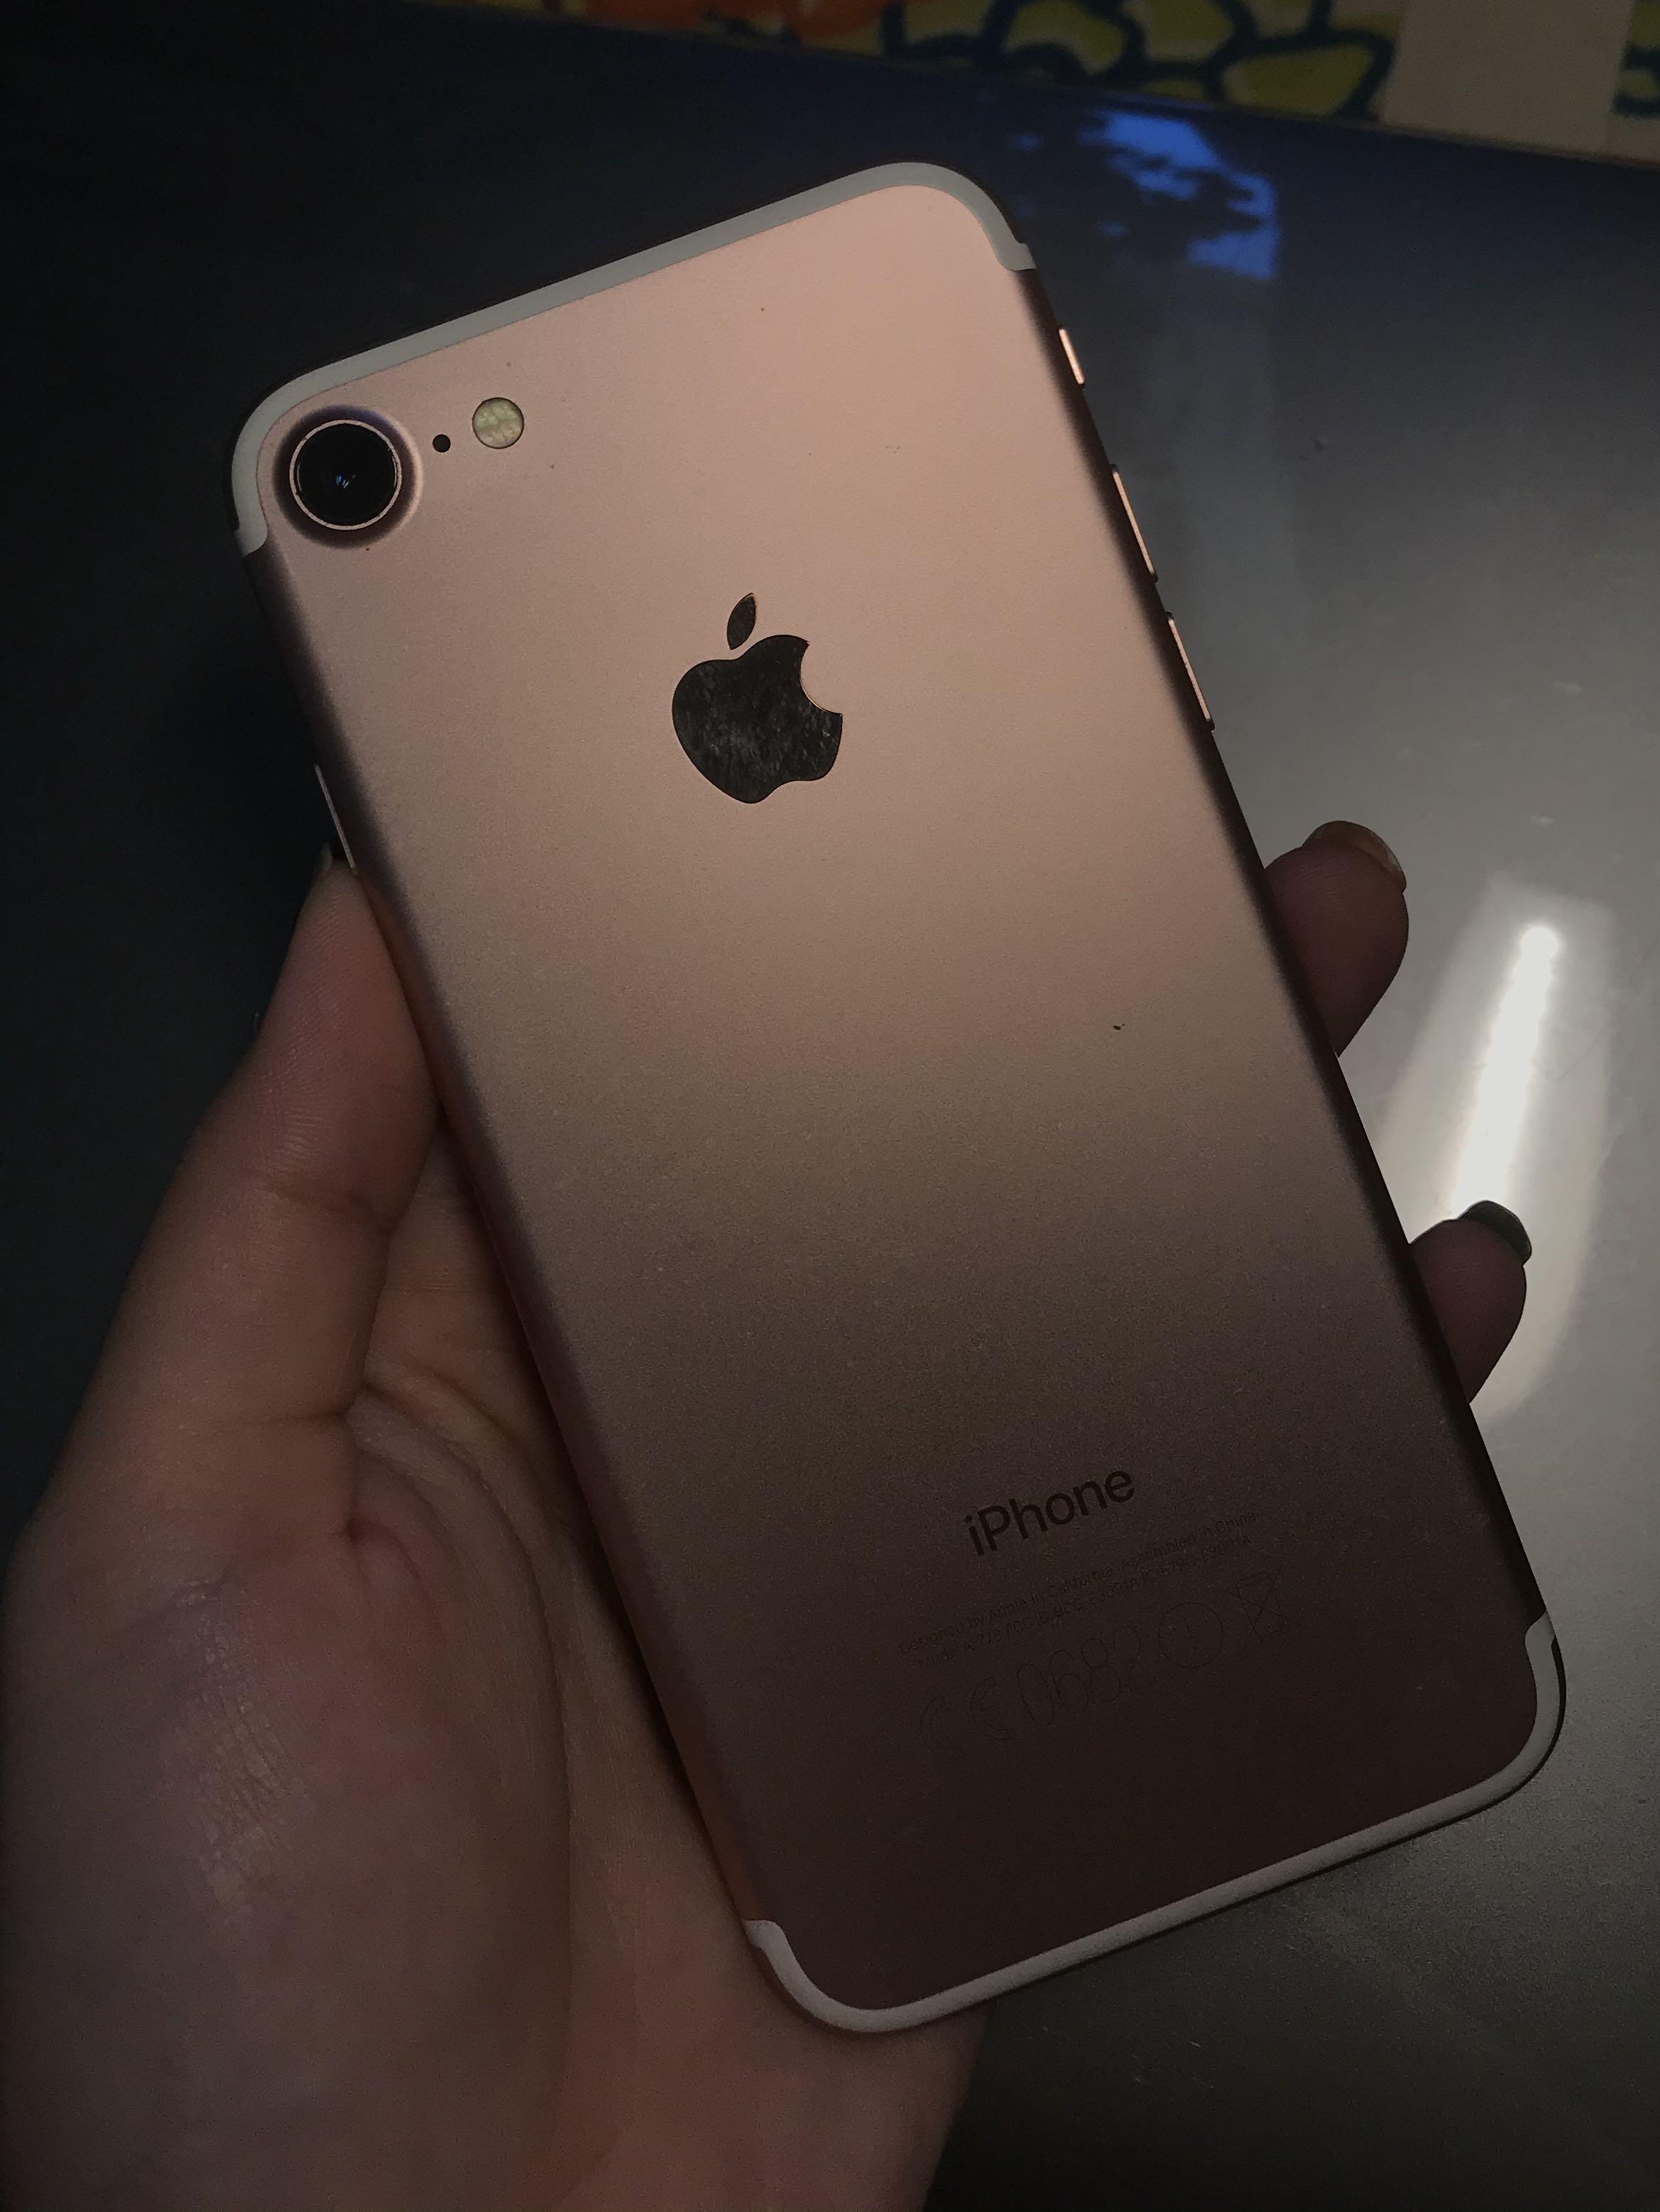 Iphone 7 32gb Rosegold Secondhand Last Price Mobile Phones Gadgets Mobile Phones Iphone Iphone 7 Series On Carousell